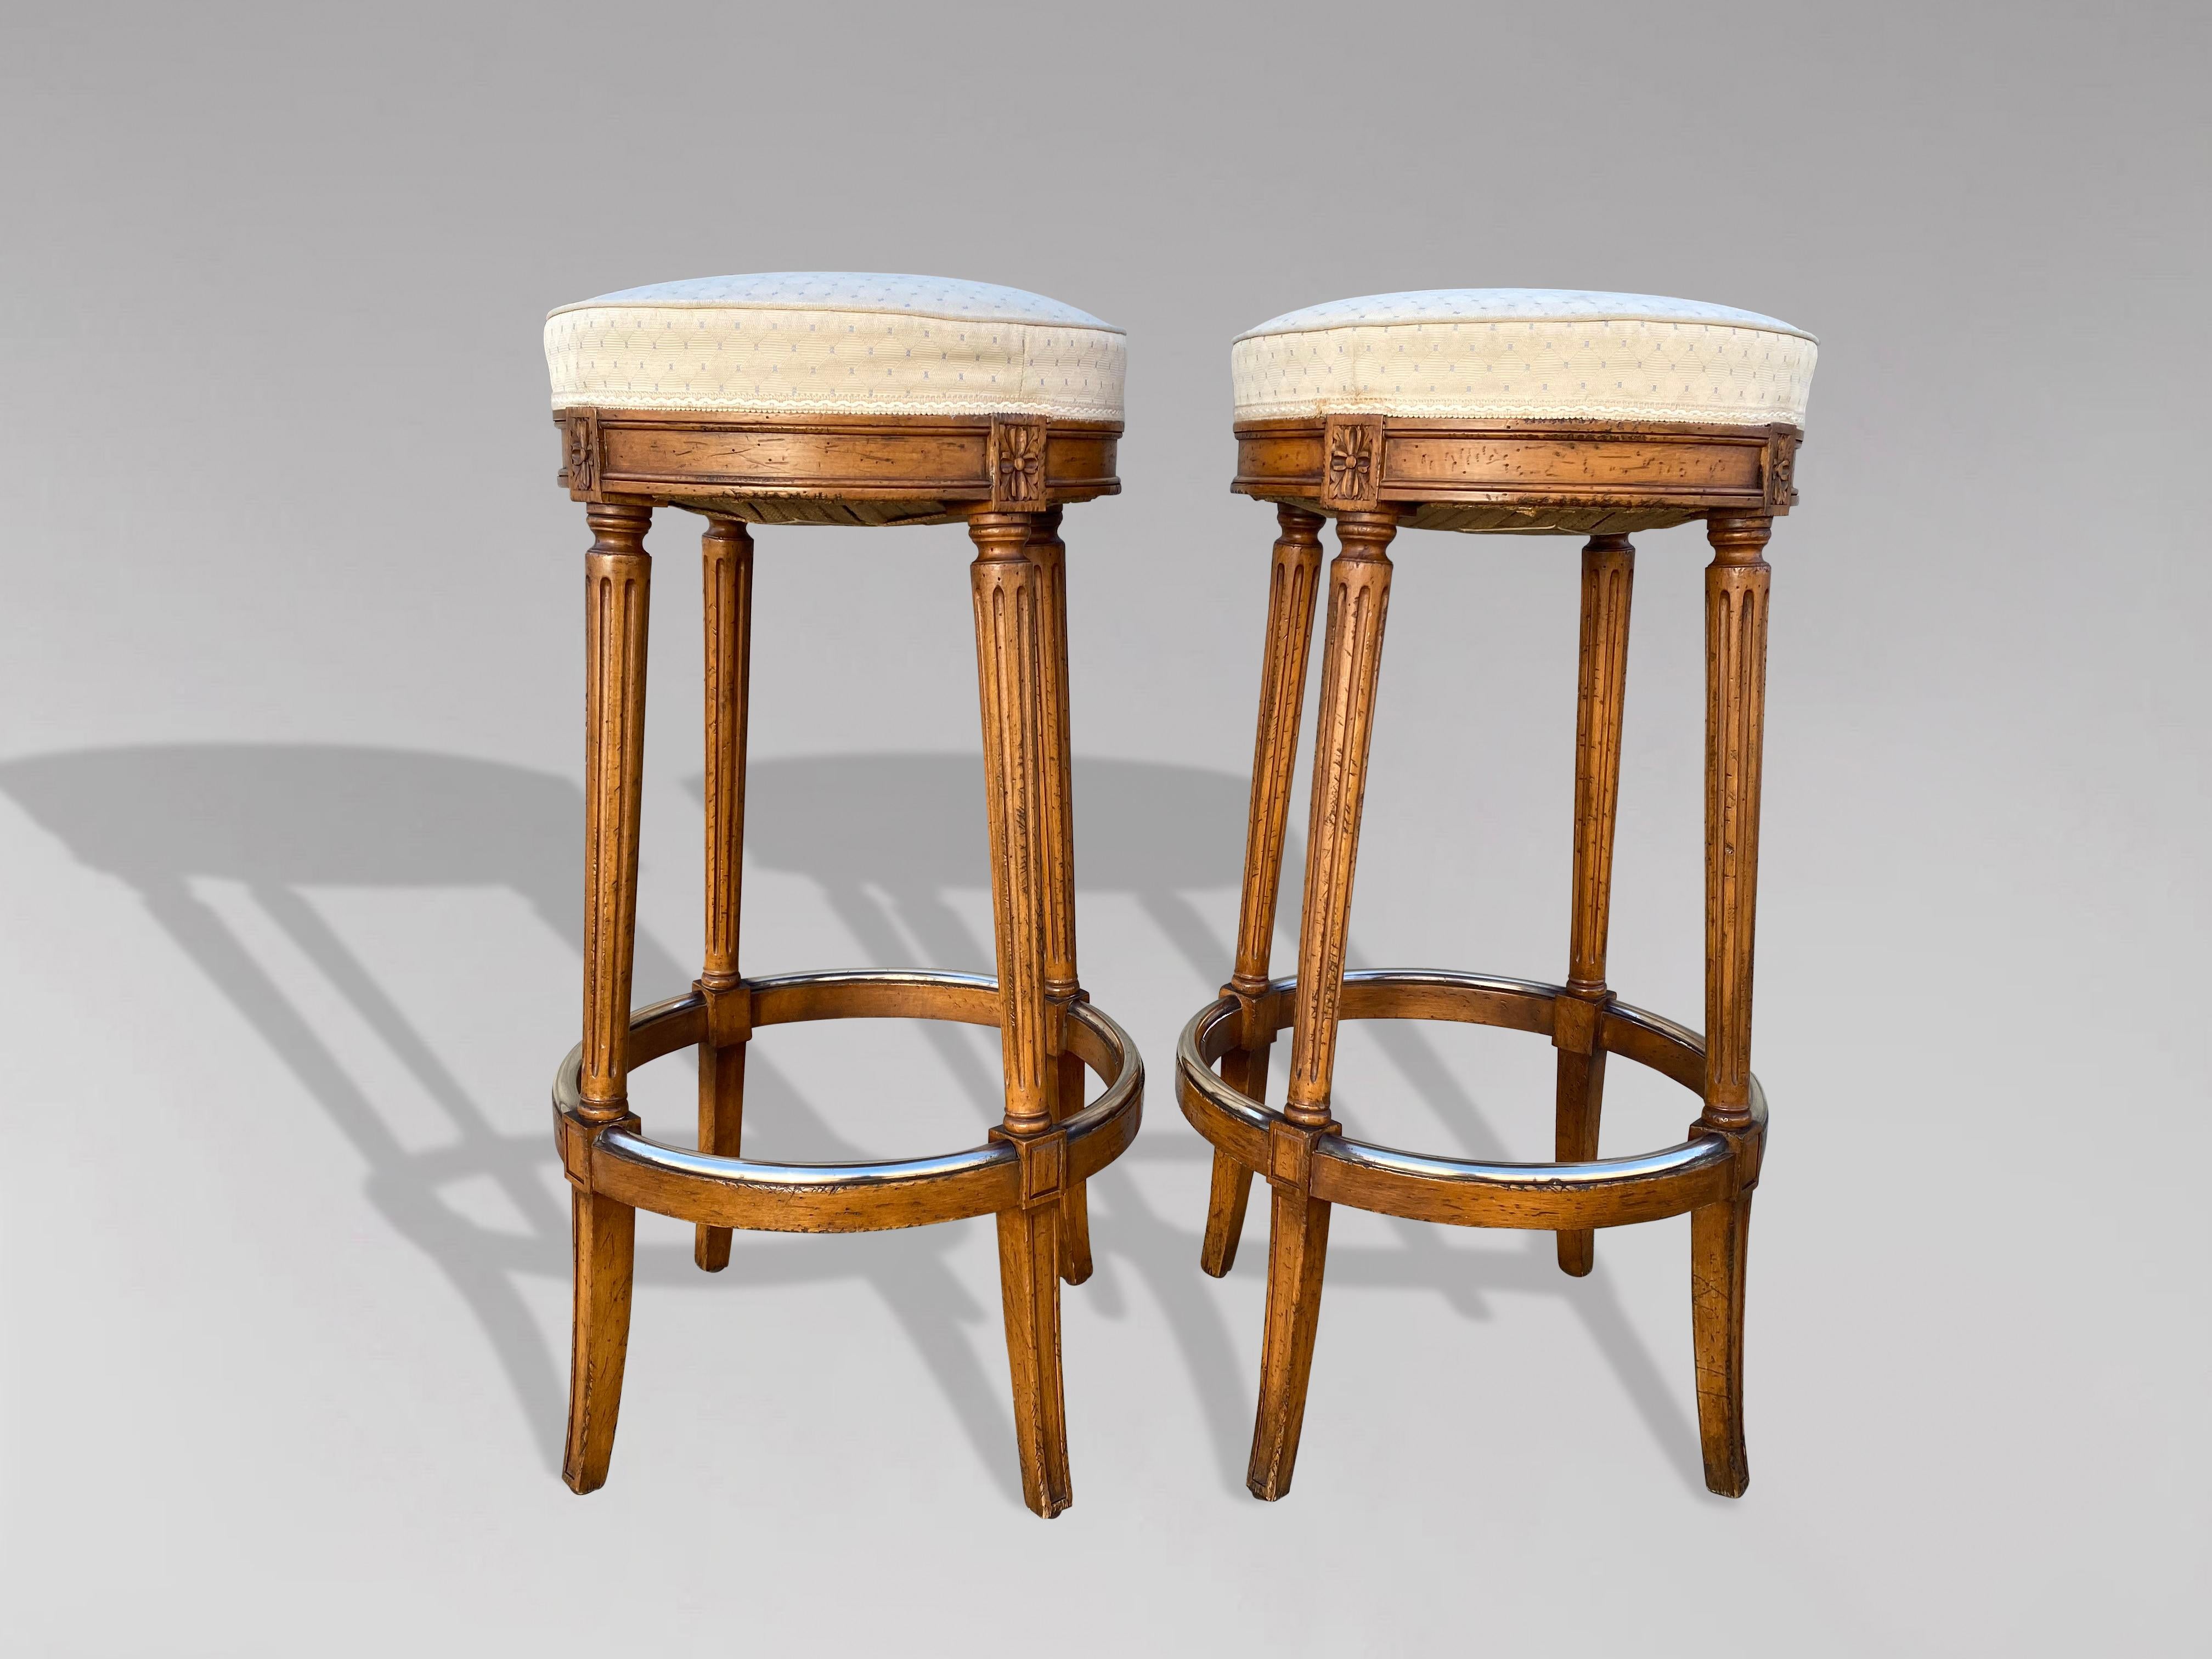 Pair of 20th century French walnut bistro bar stools or kitchen counter stools. The round seats have been reupholstered in a good quality fabric. The seats are round and are sitting on top of a solid walnut frame with splayed and hand turned reeded